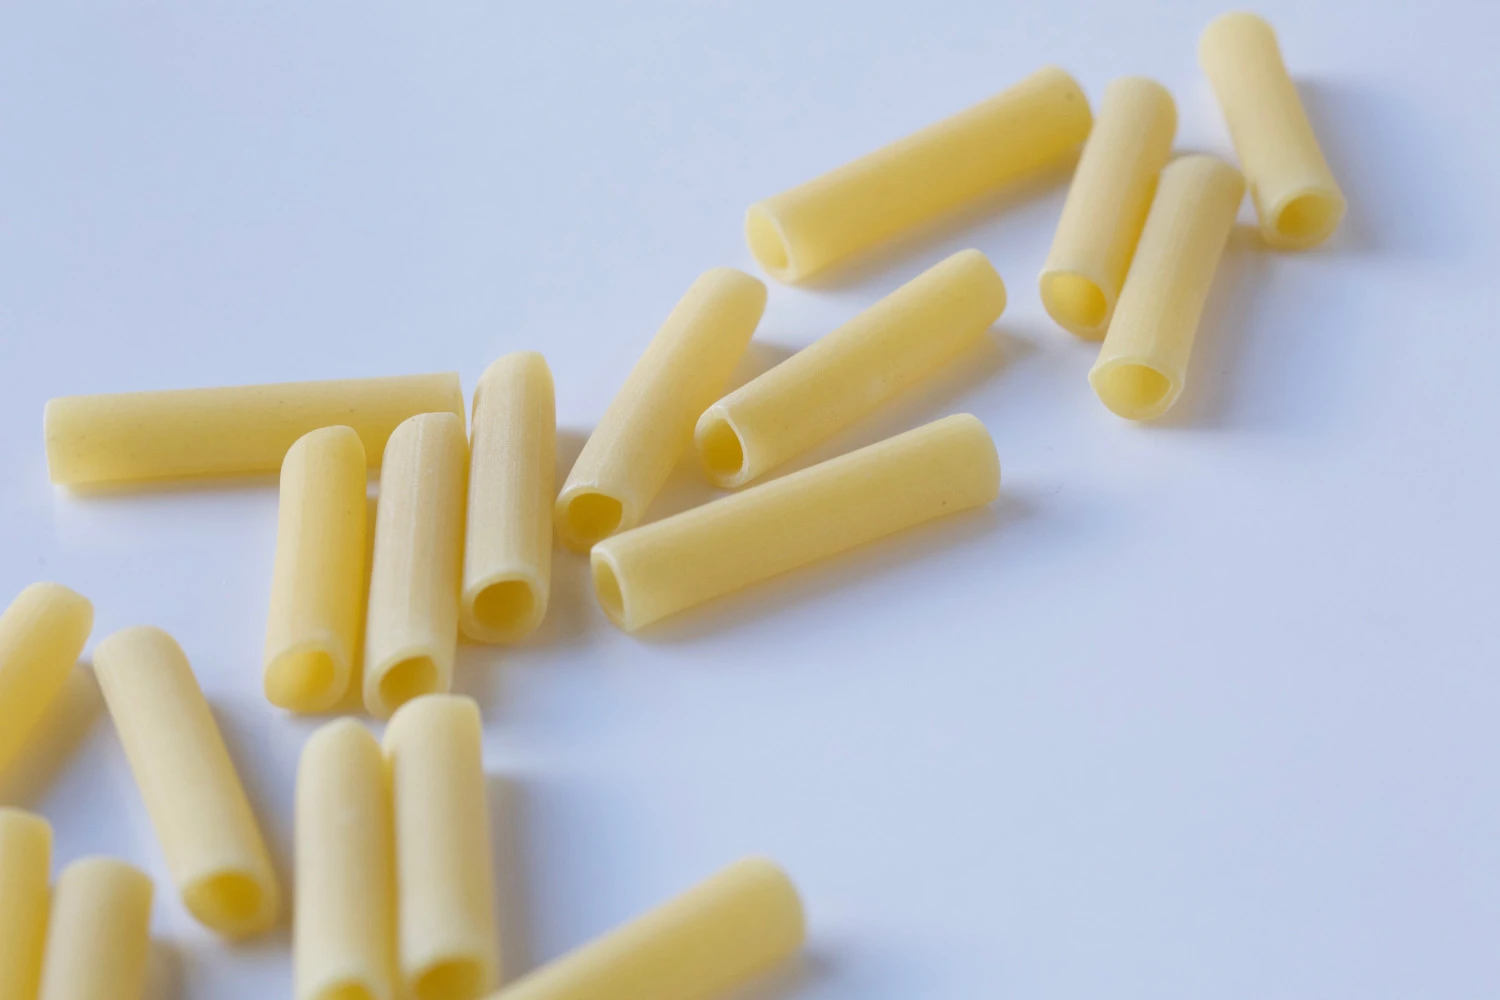 Which pasta shape is long, thin, and cylindrical?